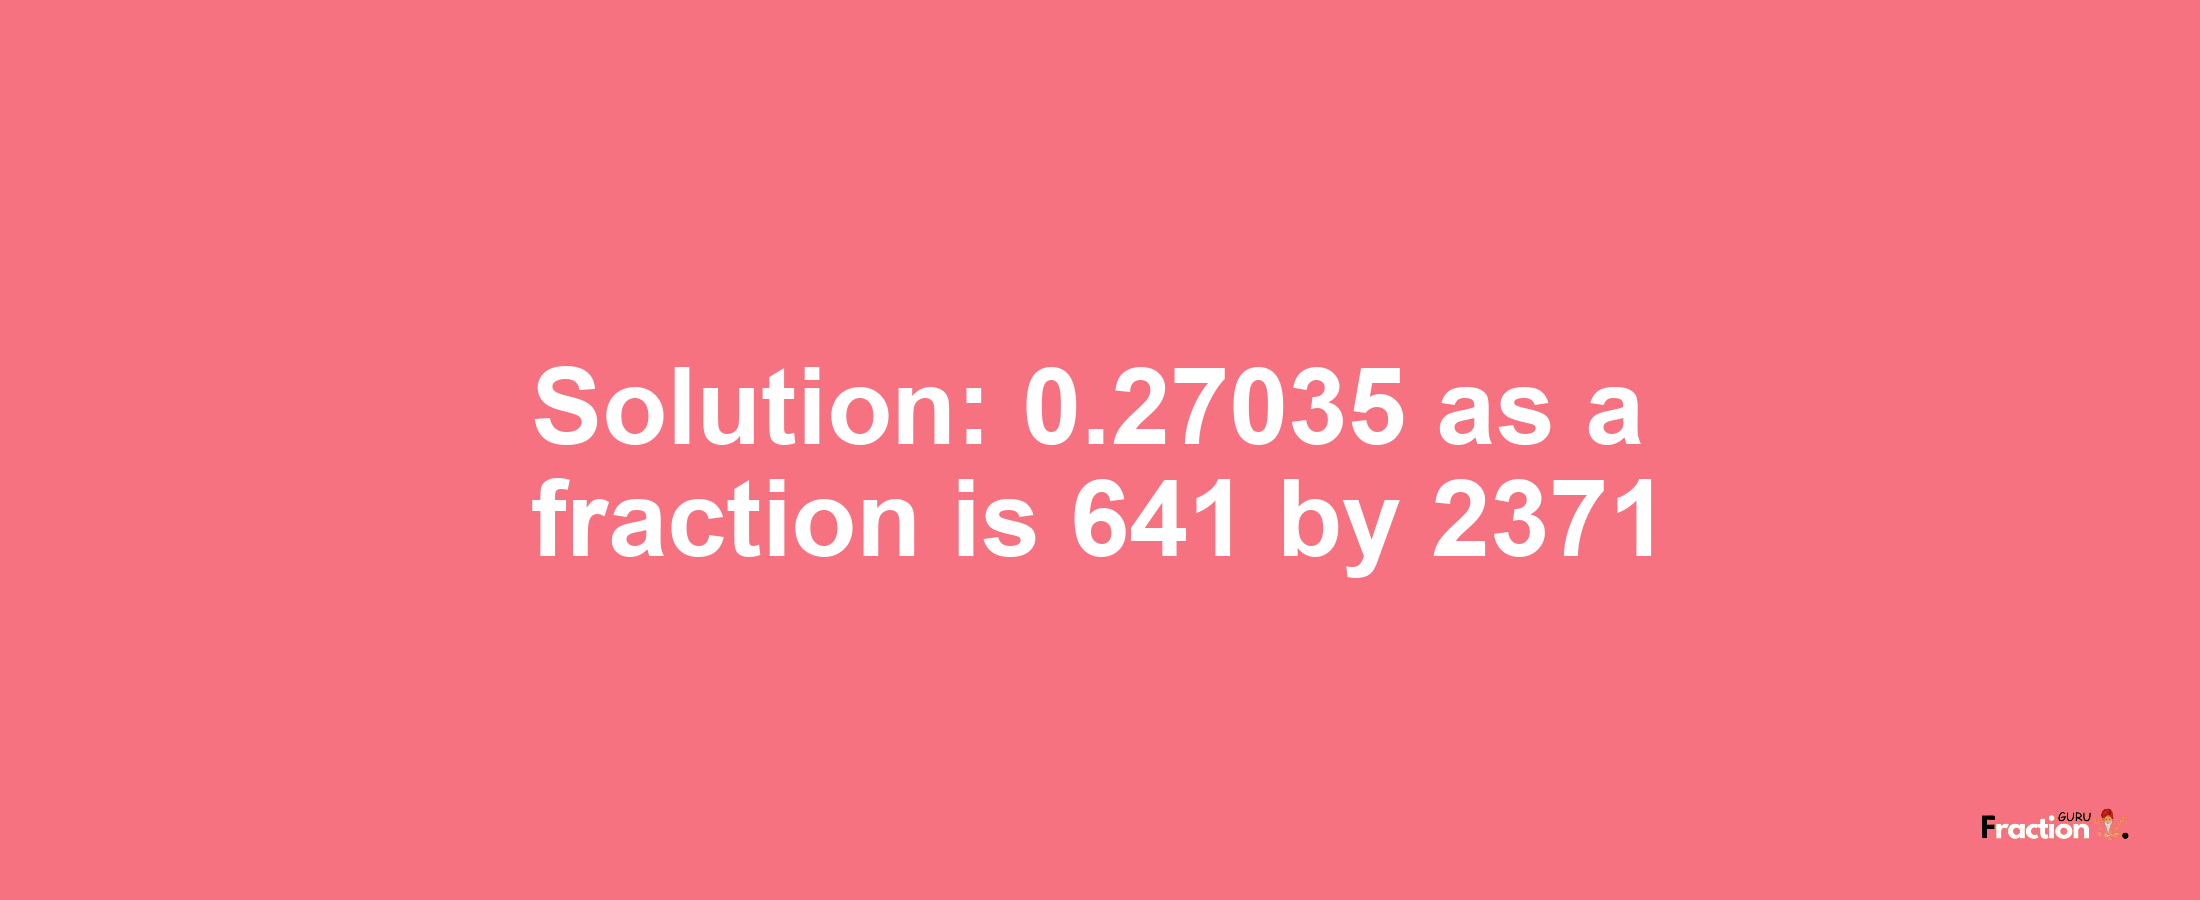 Solution:0.27035 as a fraction is 641/2371